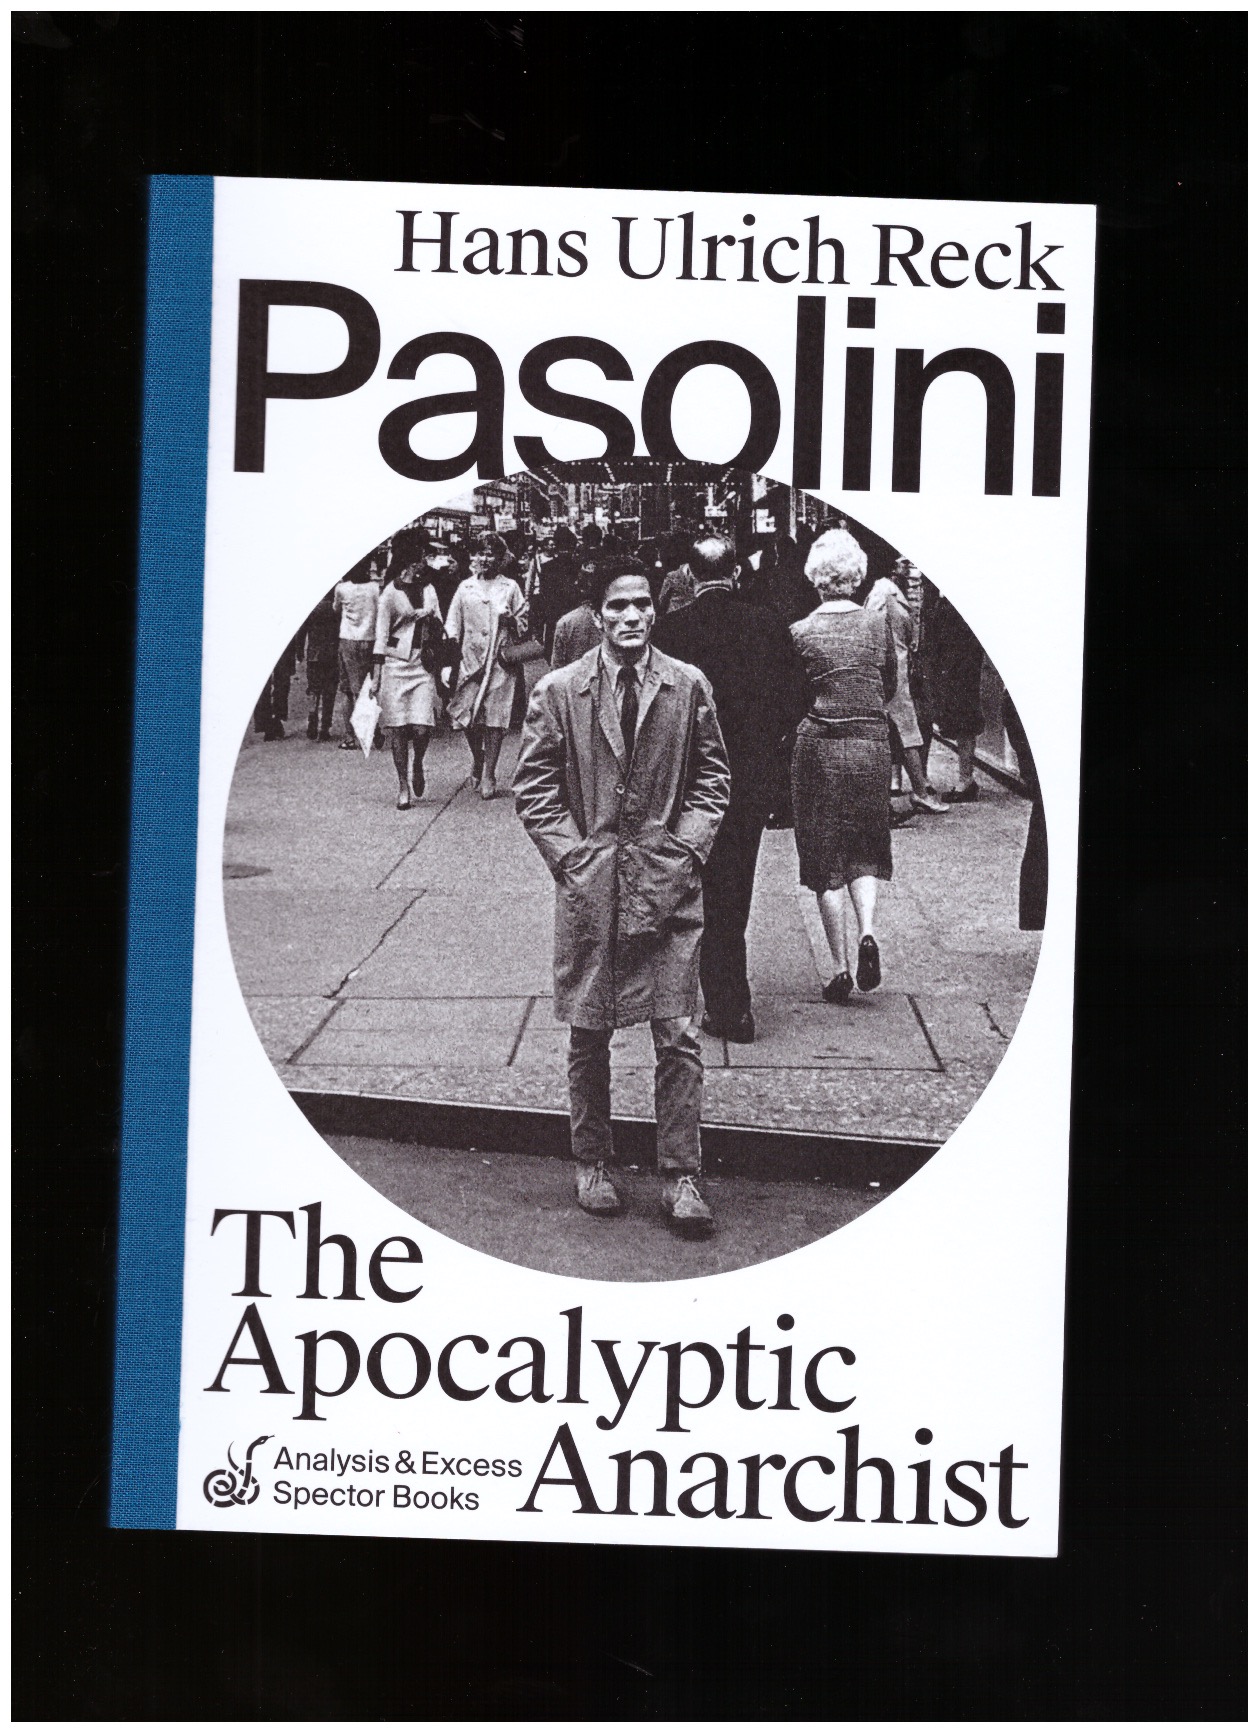 RECK, Hans Ulrich - Pasolini: The Apocalyptic Anarchist